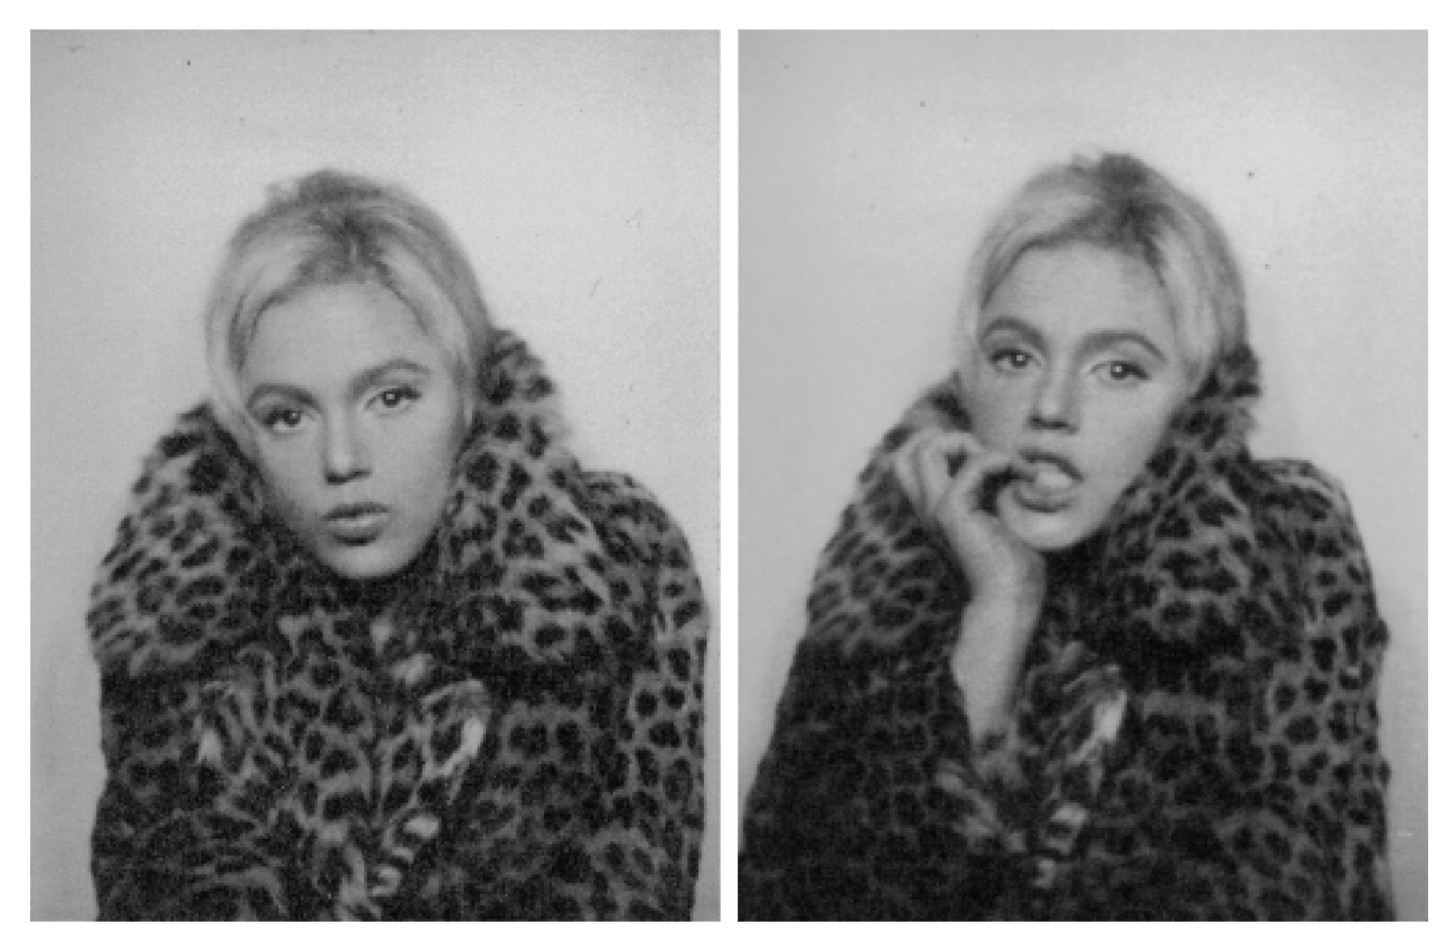 Edie Sedgwick, Youthquaker